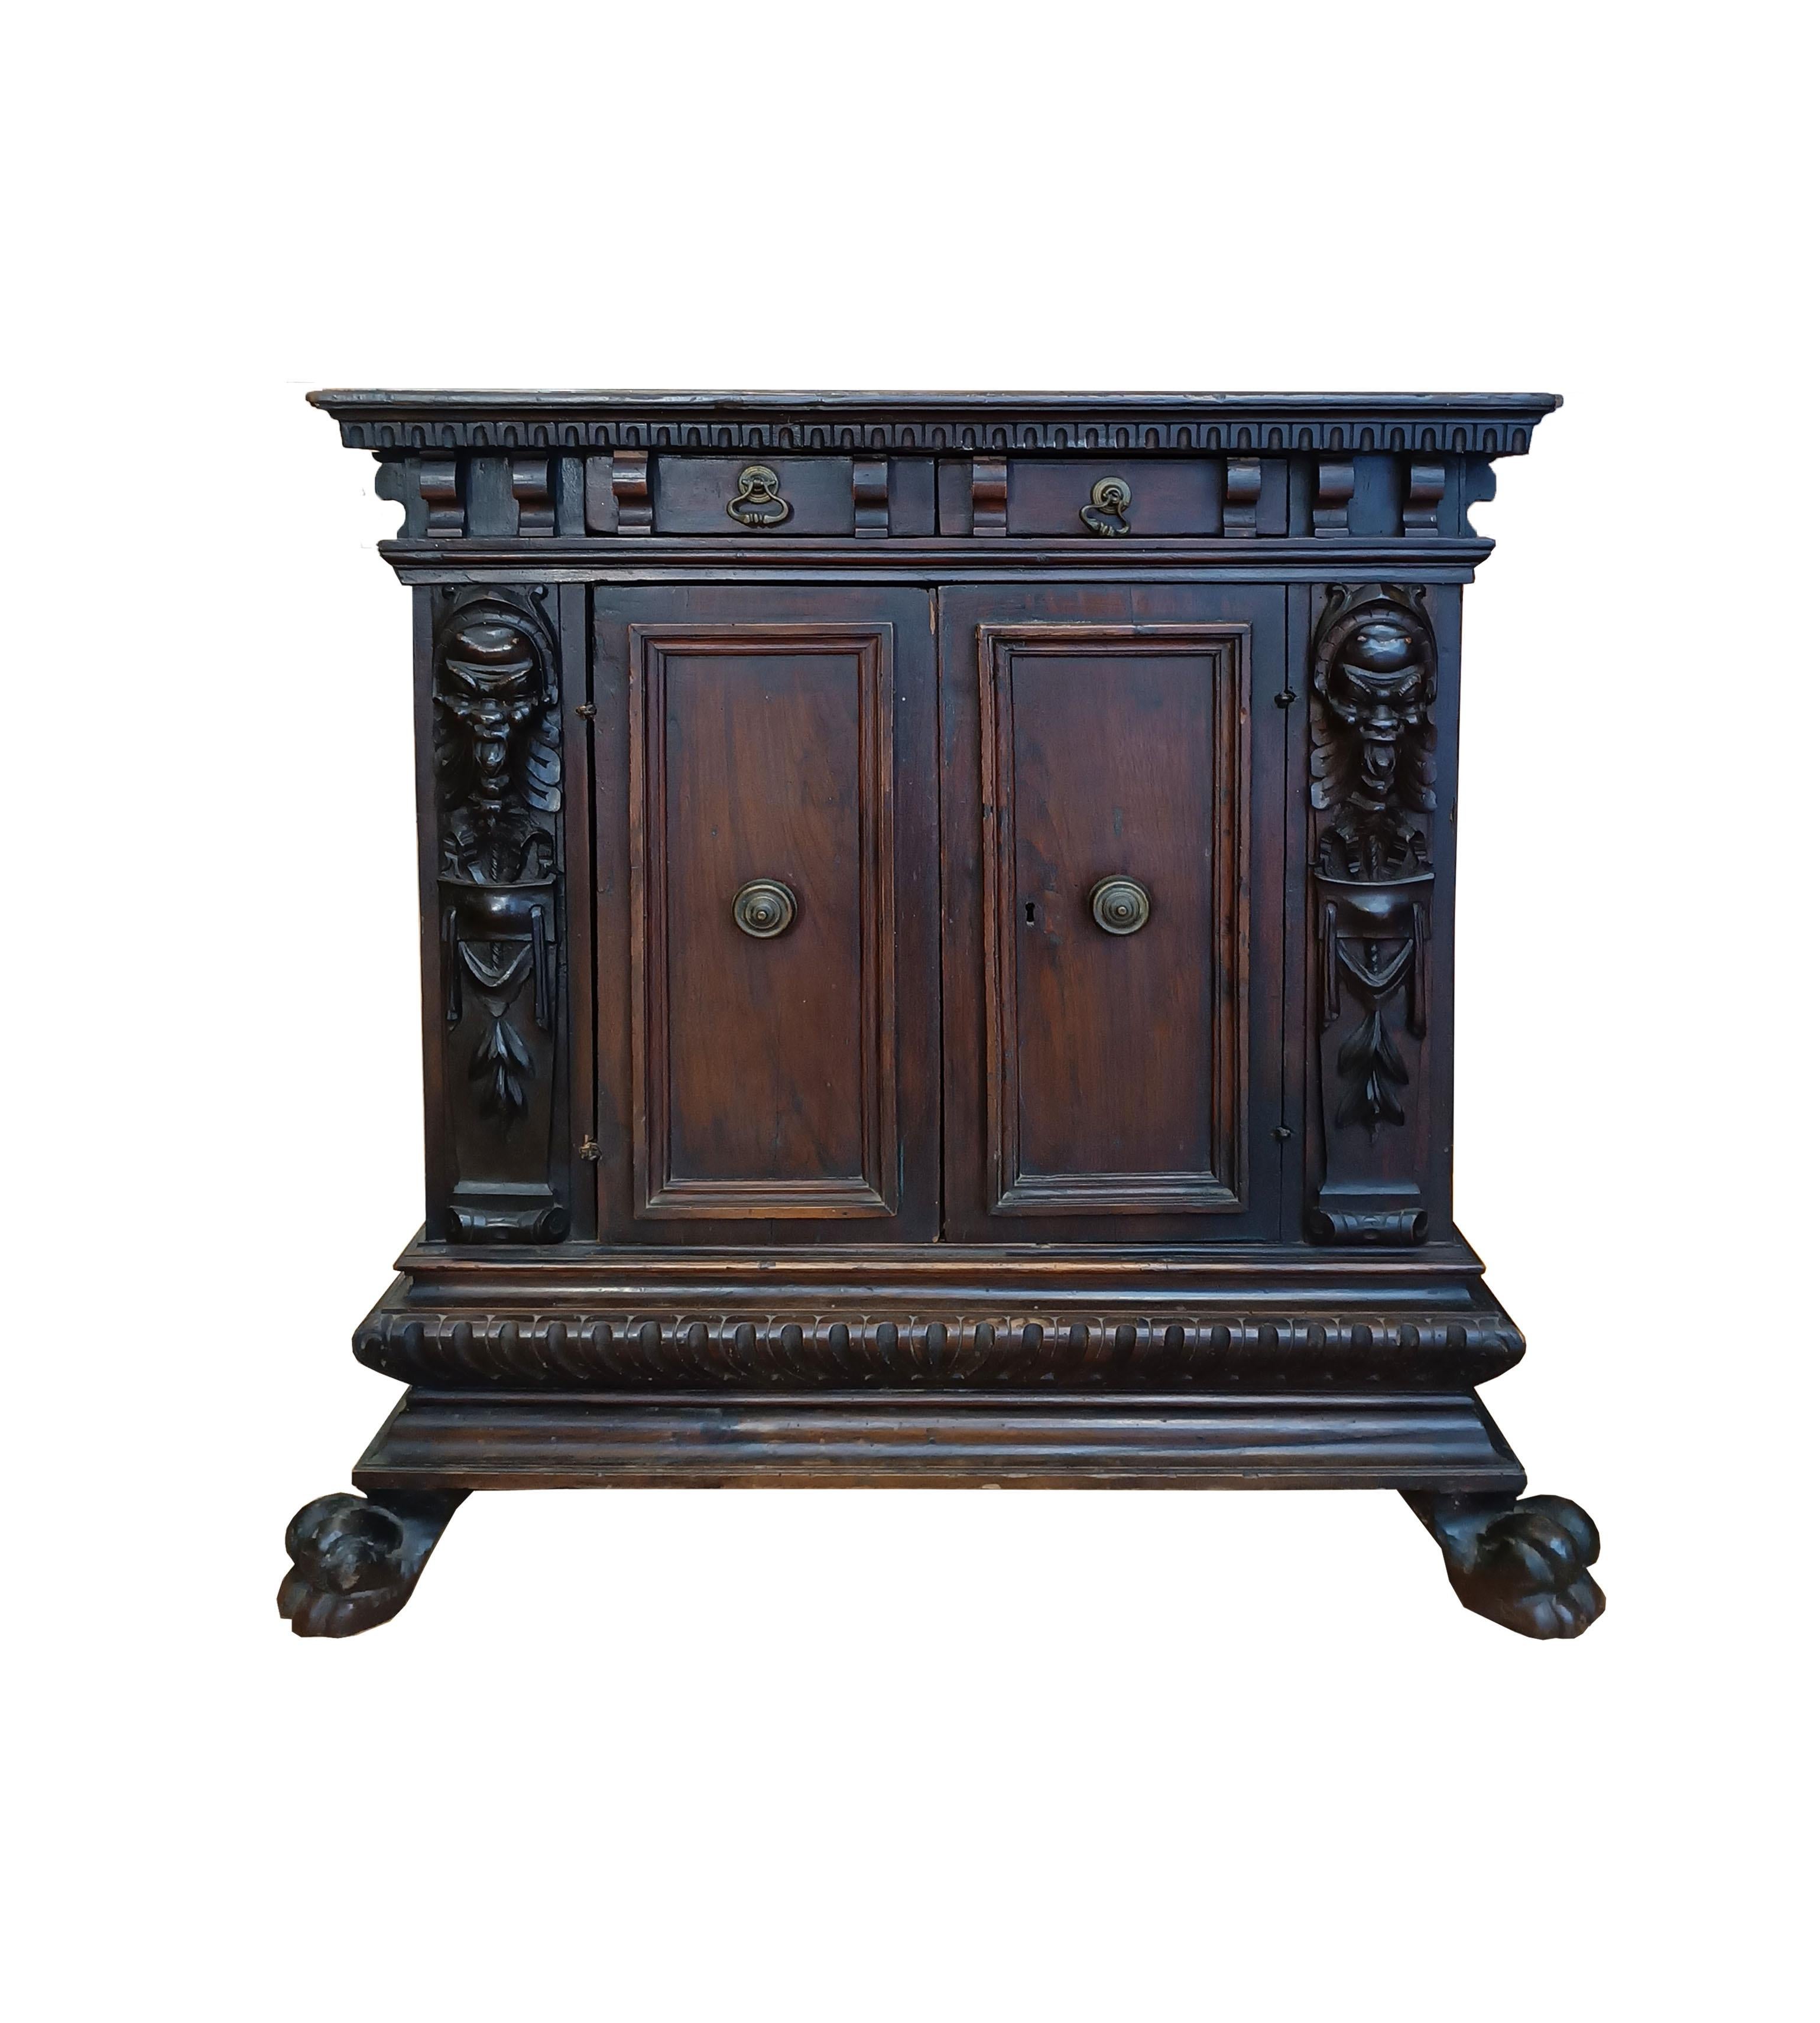 Elegant Renaissance small sideboard, made entirely of solid walnut by Florentine artisans and dating back to the first half of the 16th century. Its structure is composed of two front doors and two drawers, adorned with elegant knob and bell